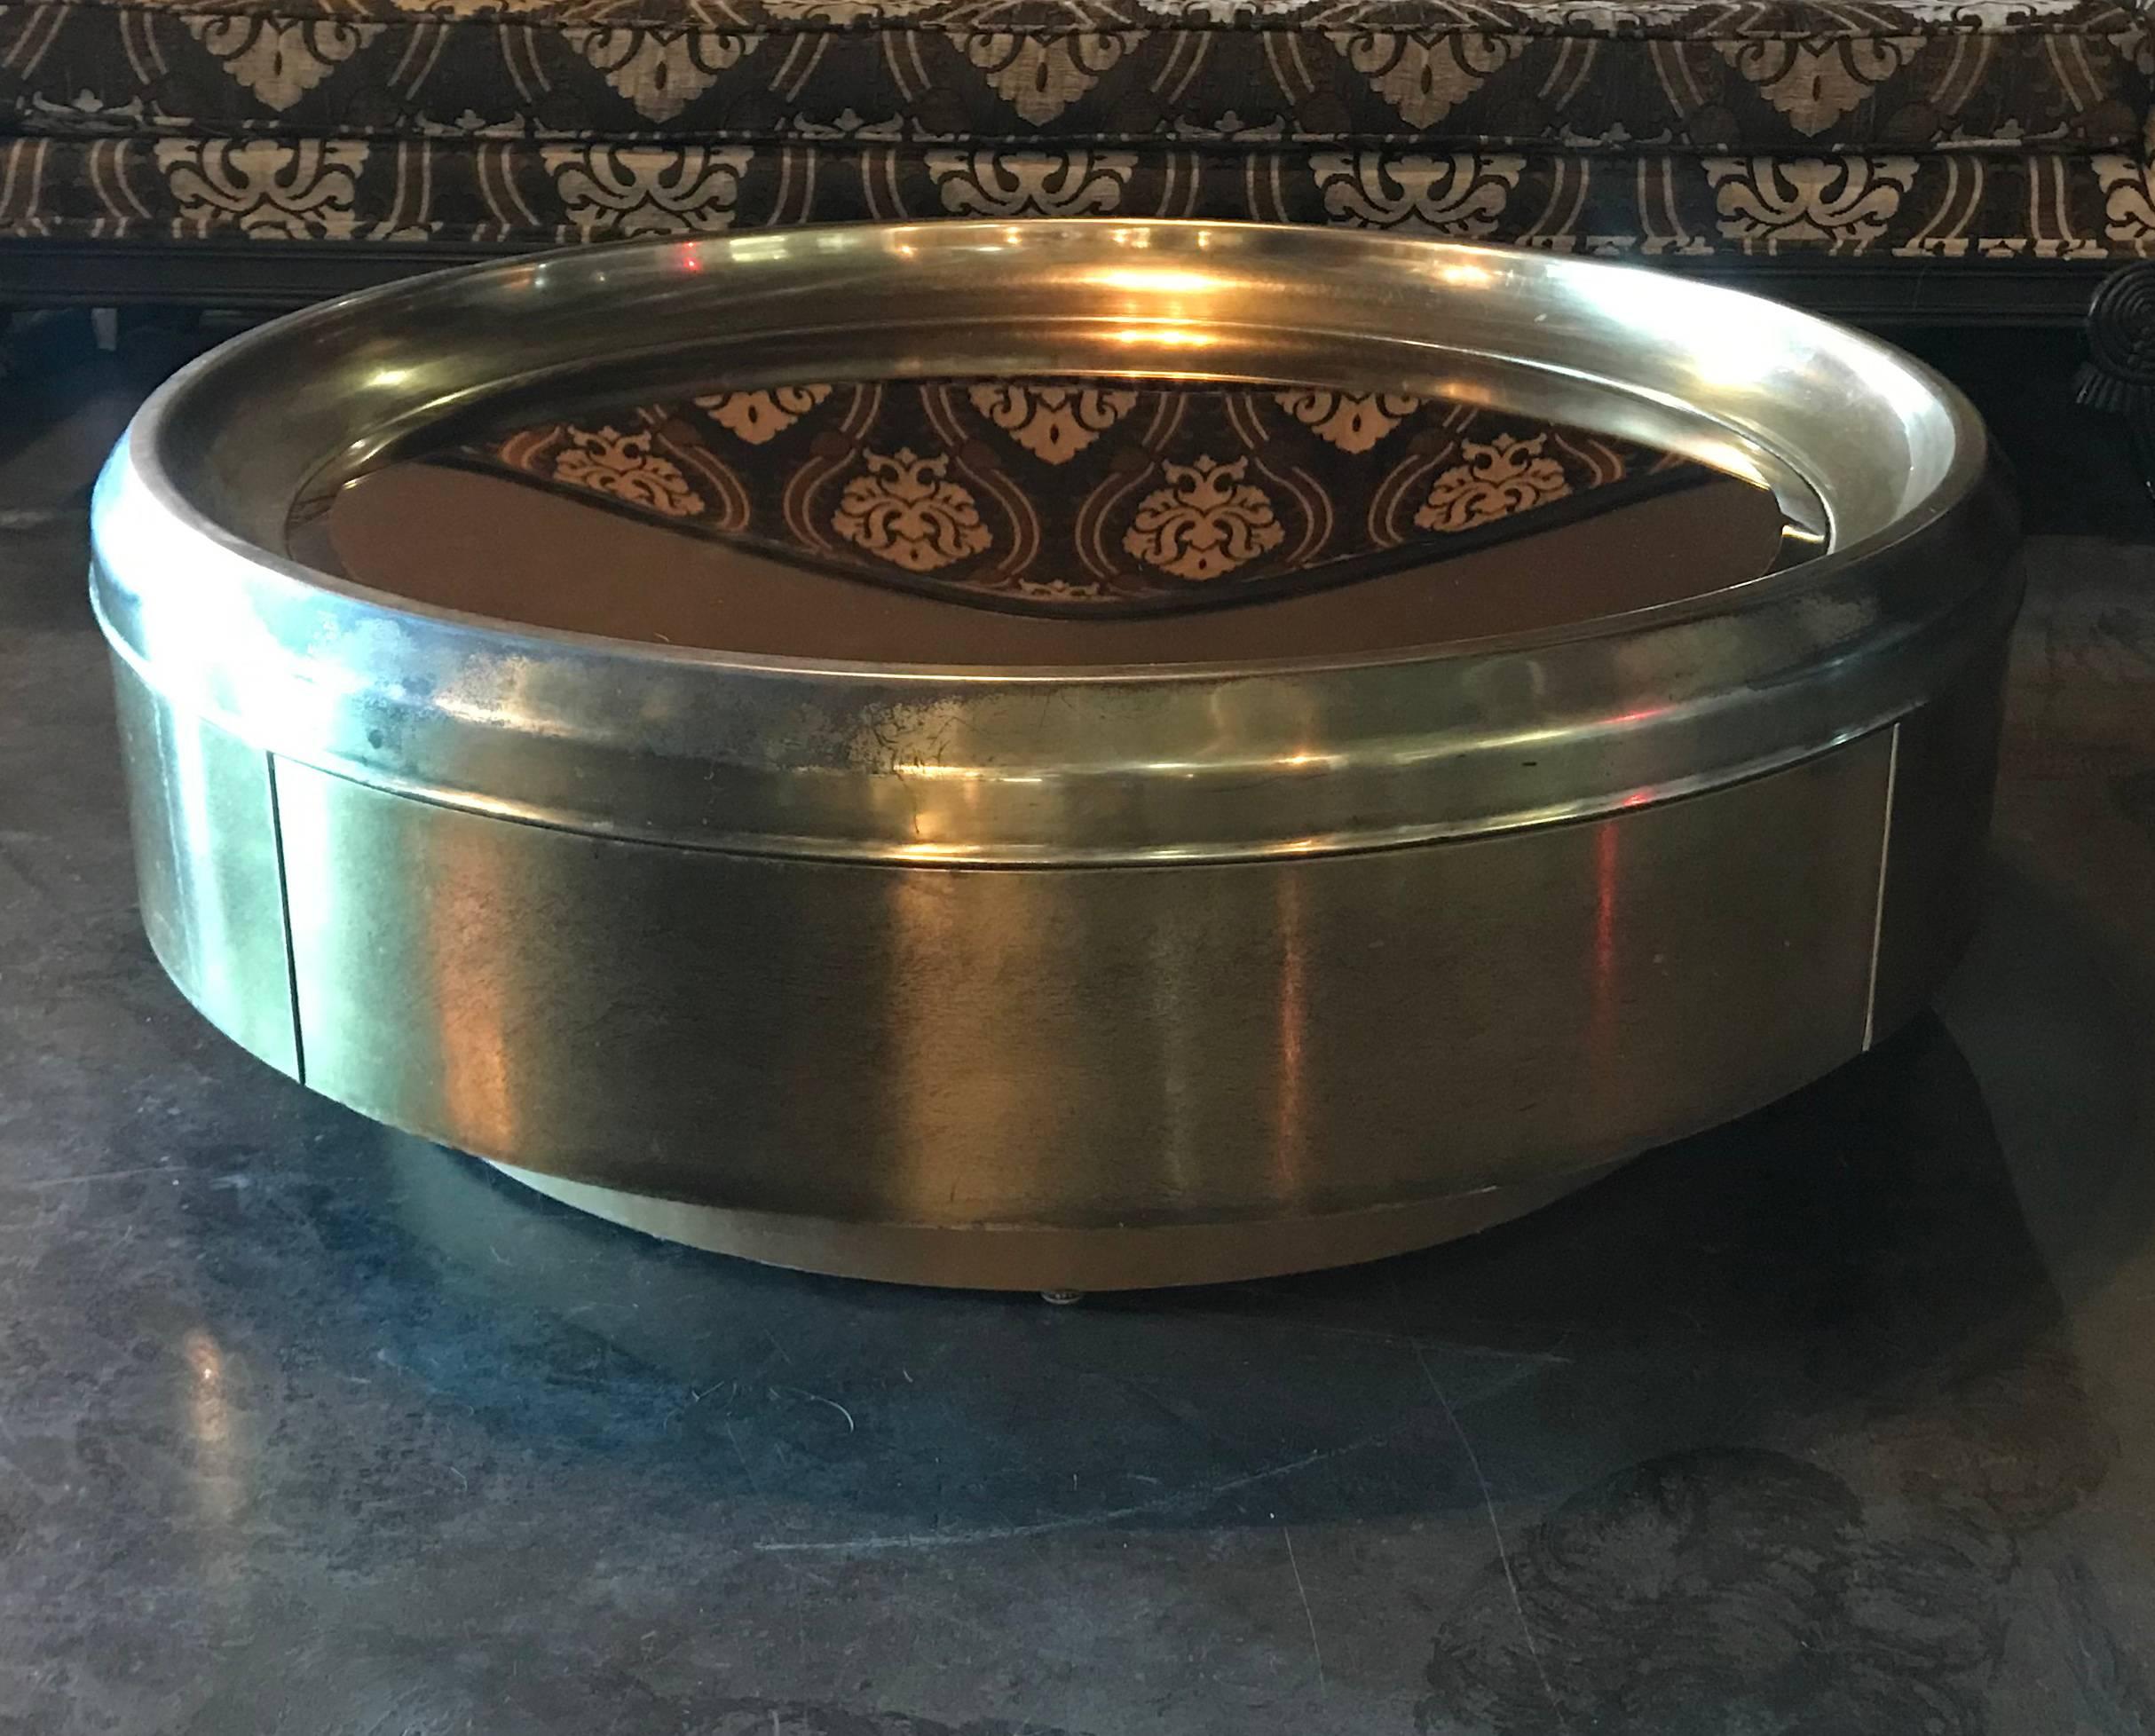 This table is absolutely stunning example of Mid-Century Modern design by Mastercraft. This canister brass coffee table features a gorgeous heavily patinated brass body with a brass tinted mirrored top.